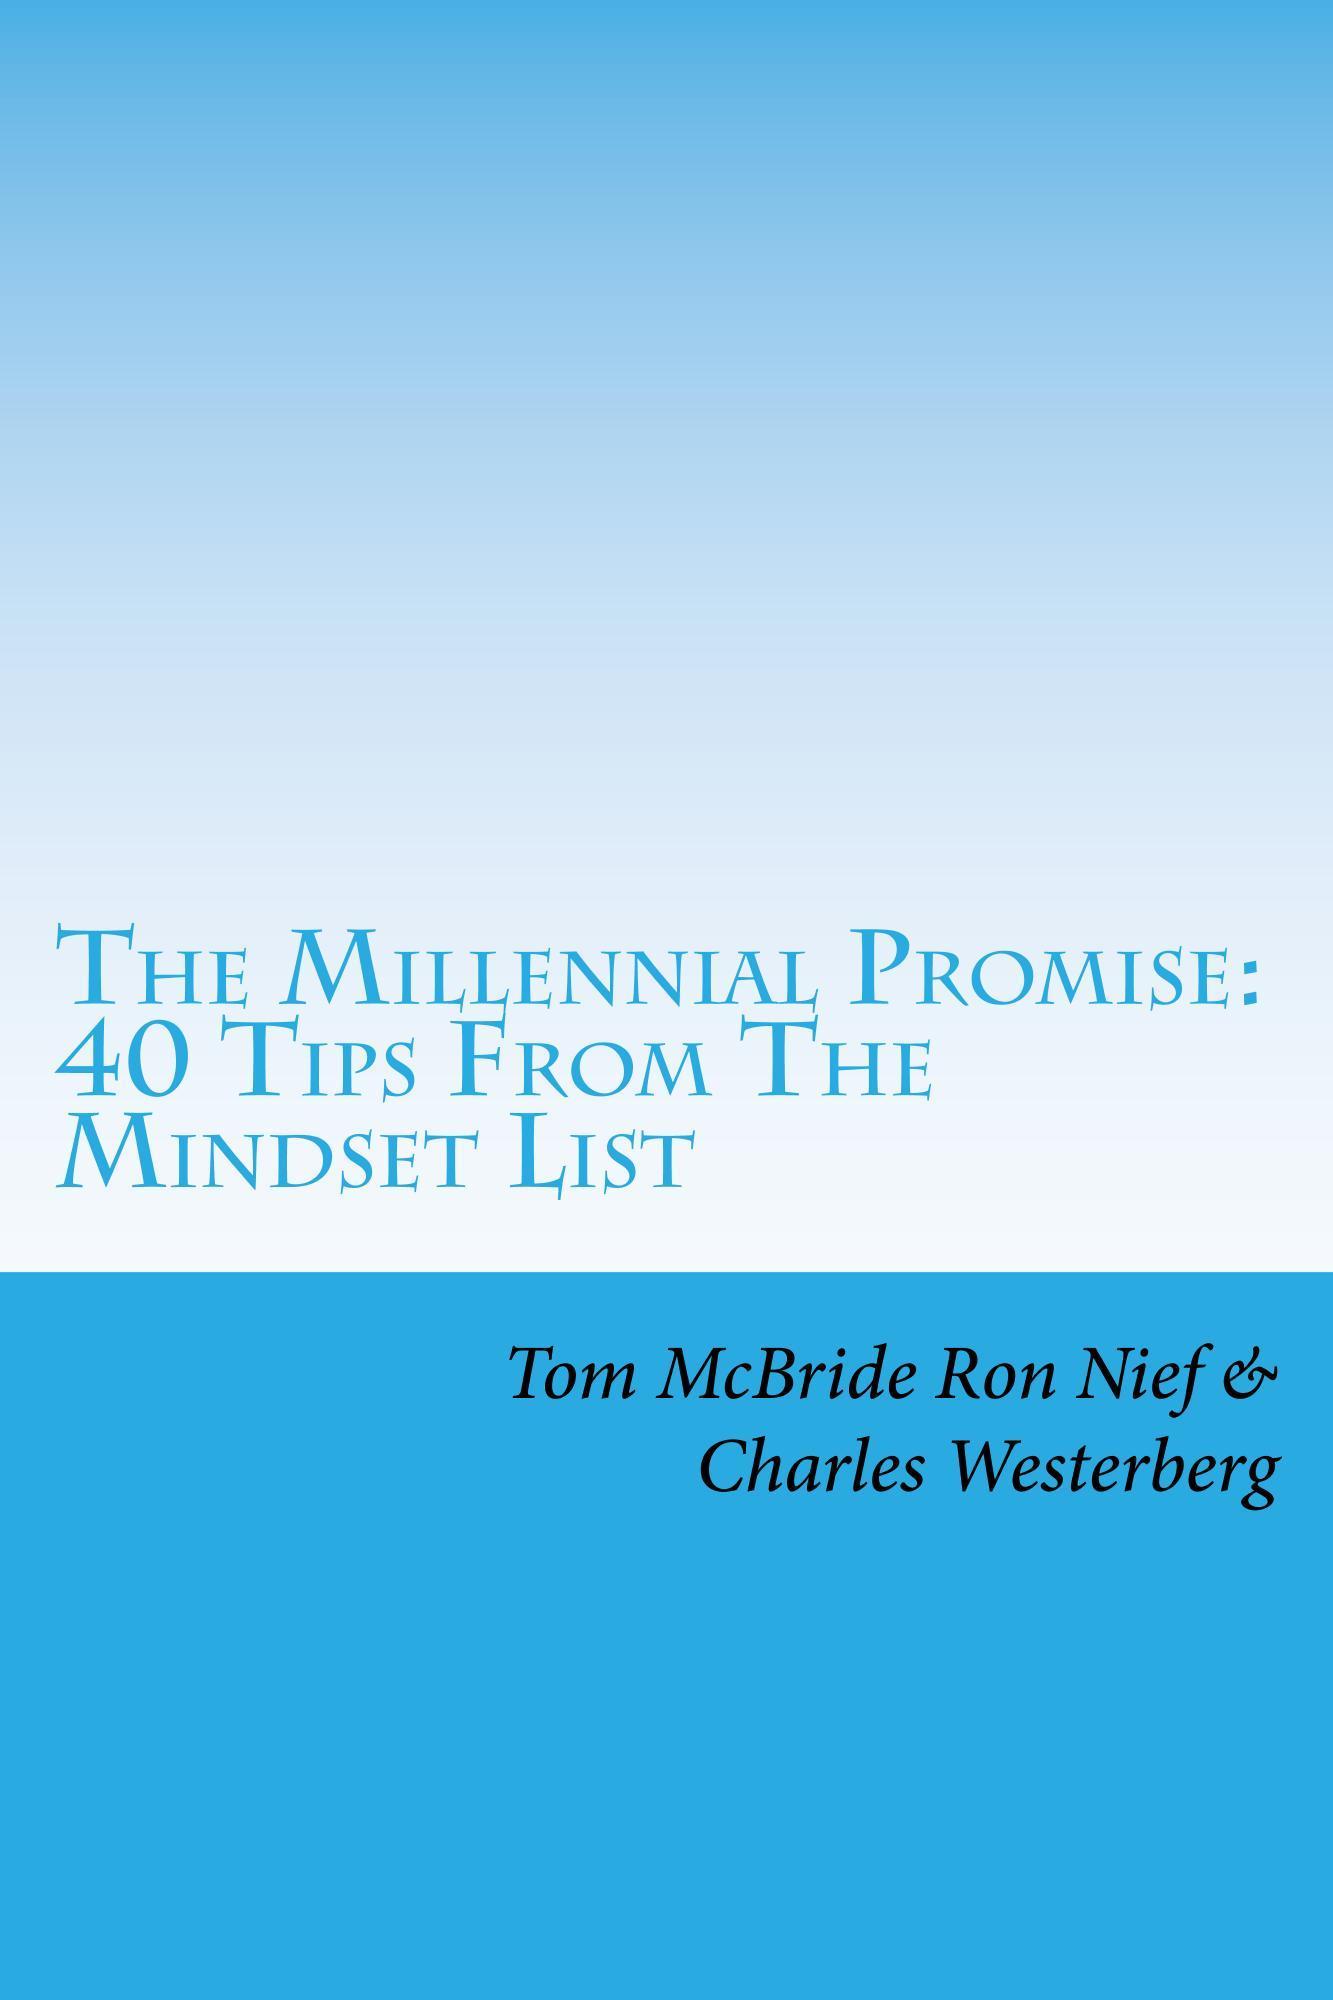 The Millennial Promise: 40 Tips From The Mindset List